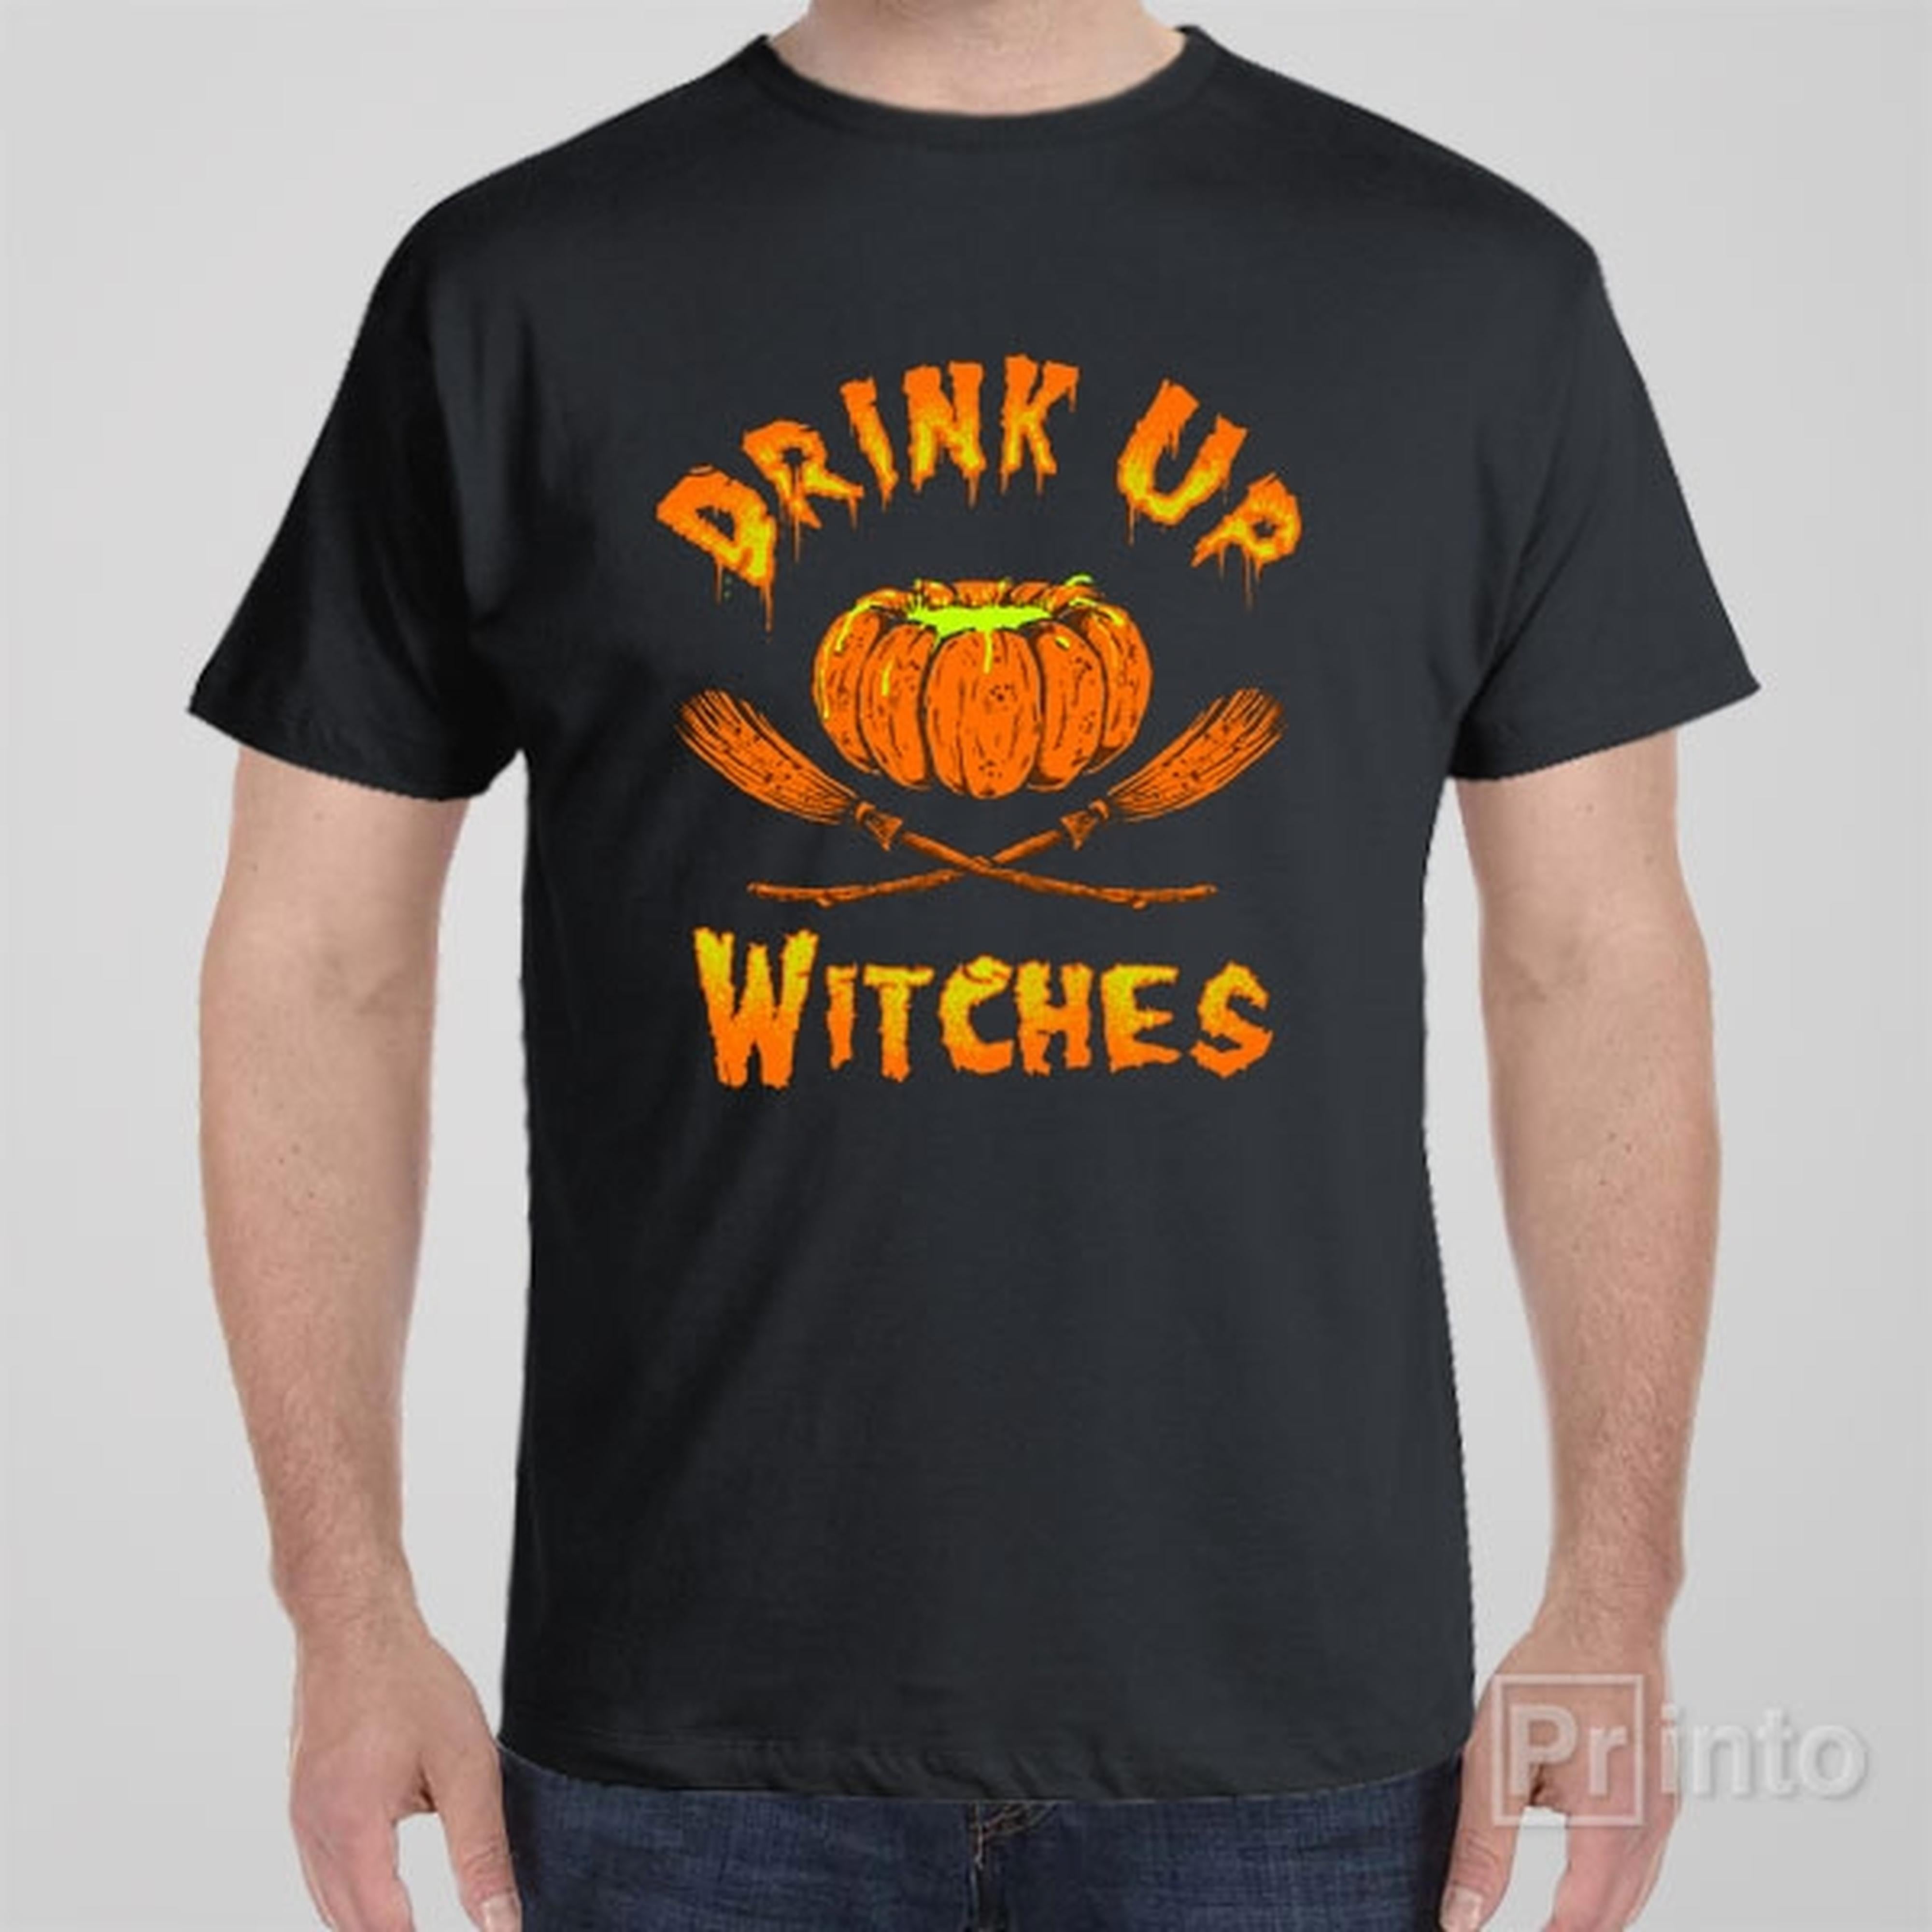 drink-up-witches-t-shirt